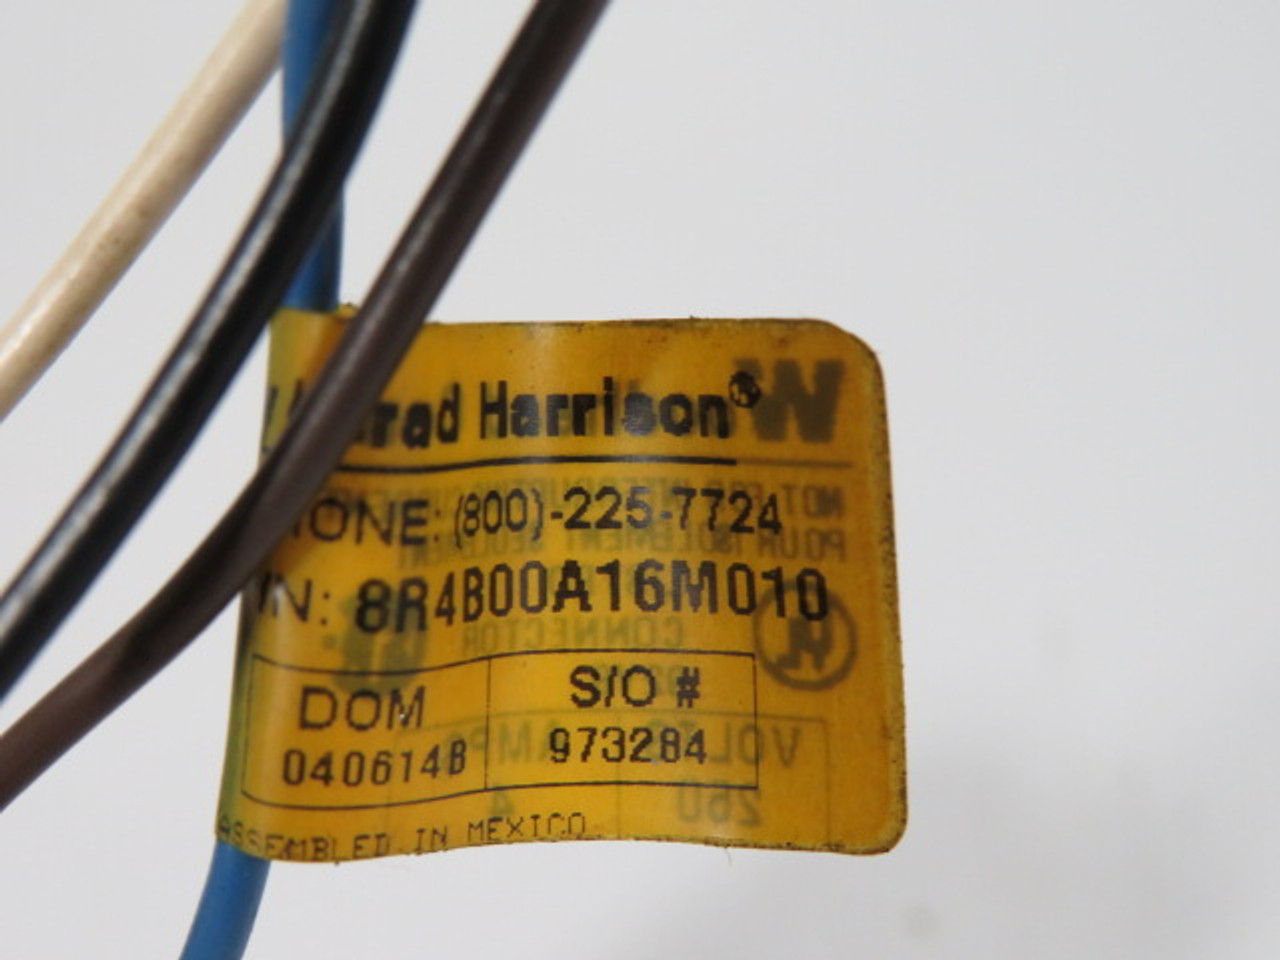 Brad Harrison 8R4B00A16M010 Receptacle 12" 250V 4A CUT CABLE USED